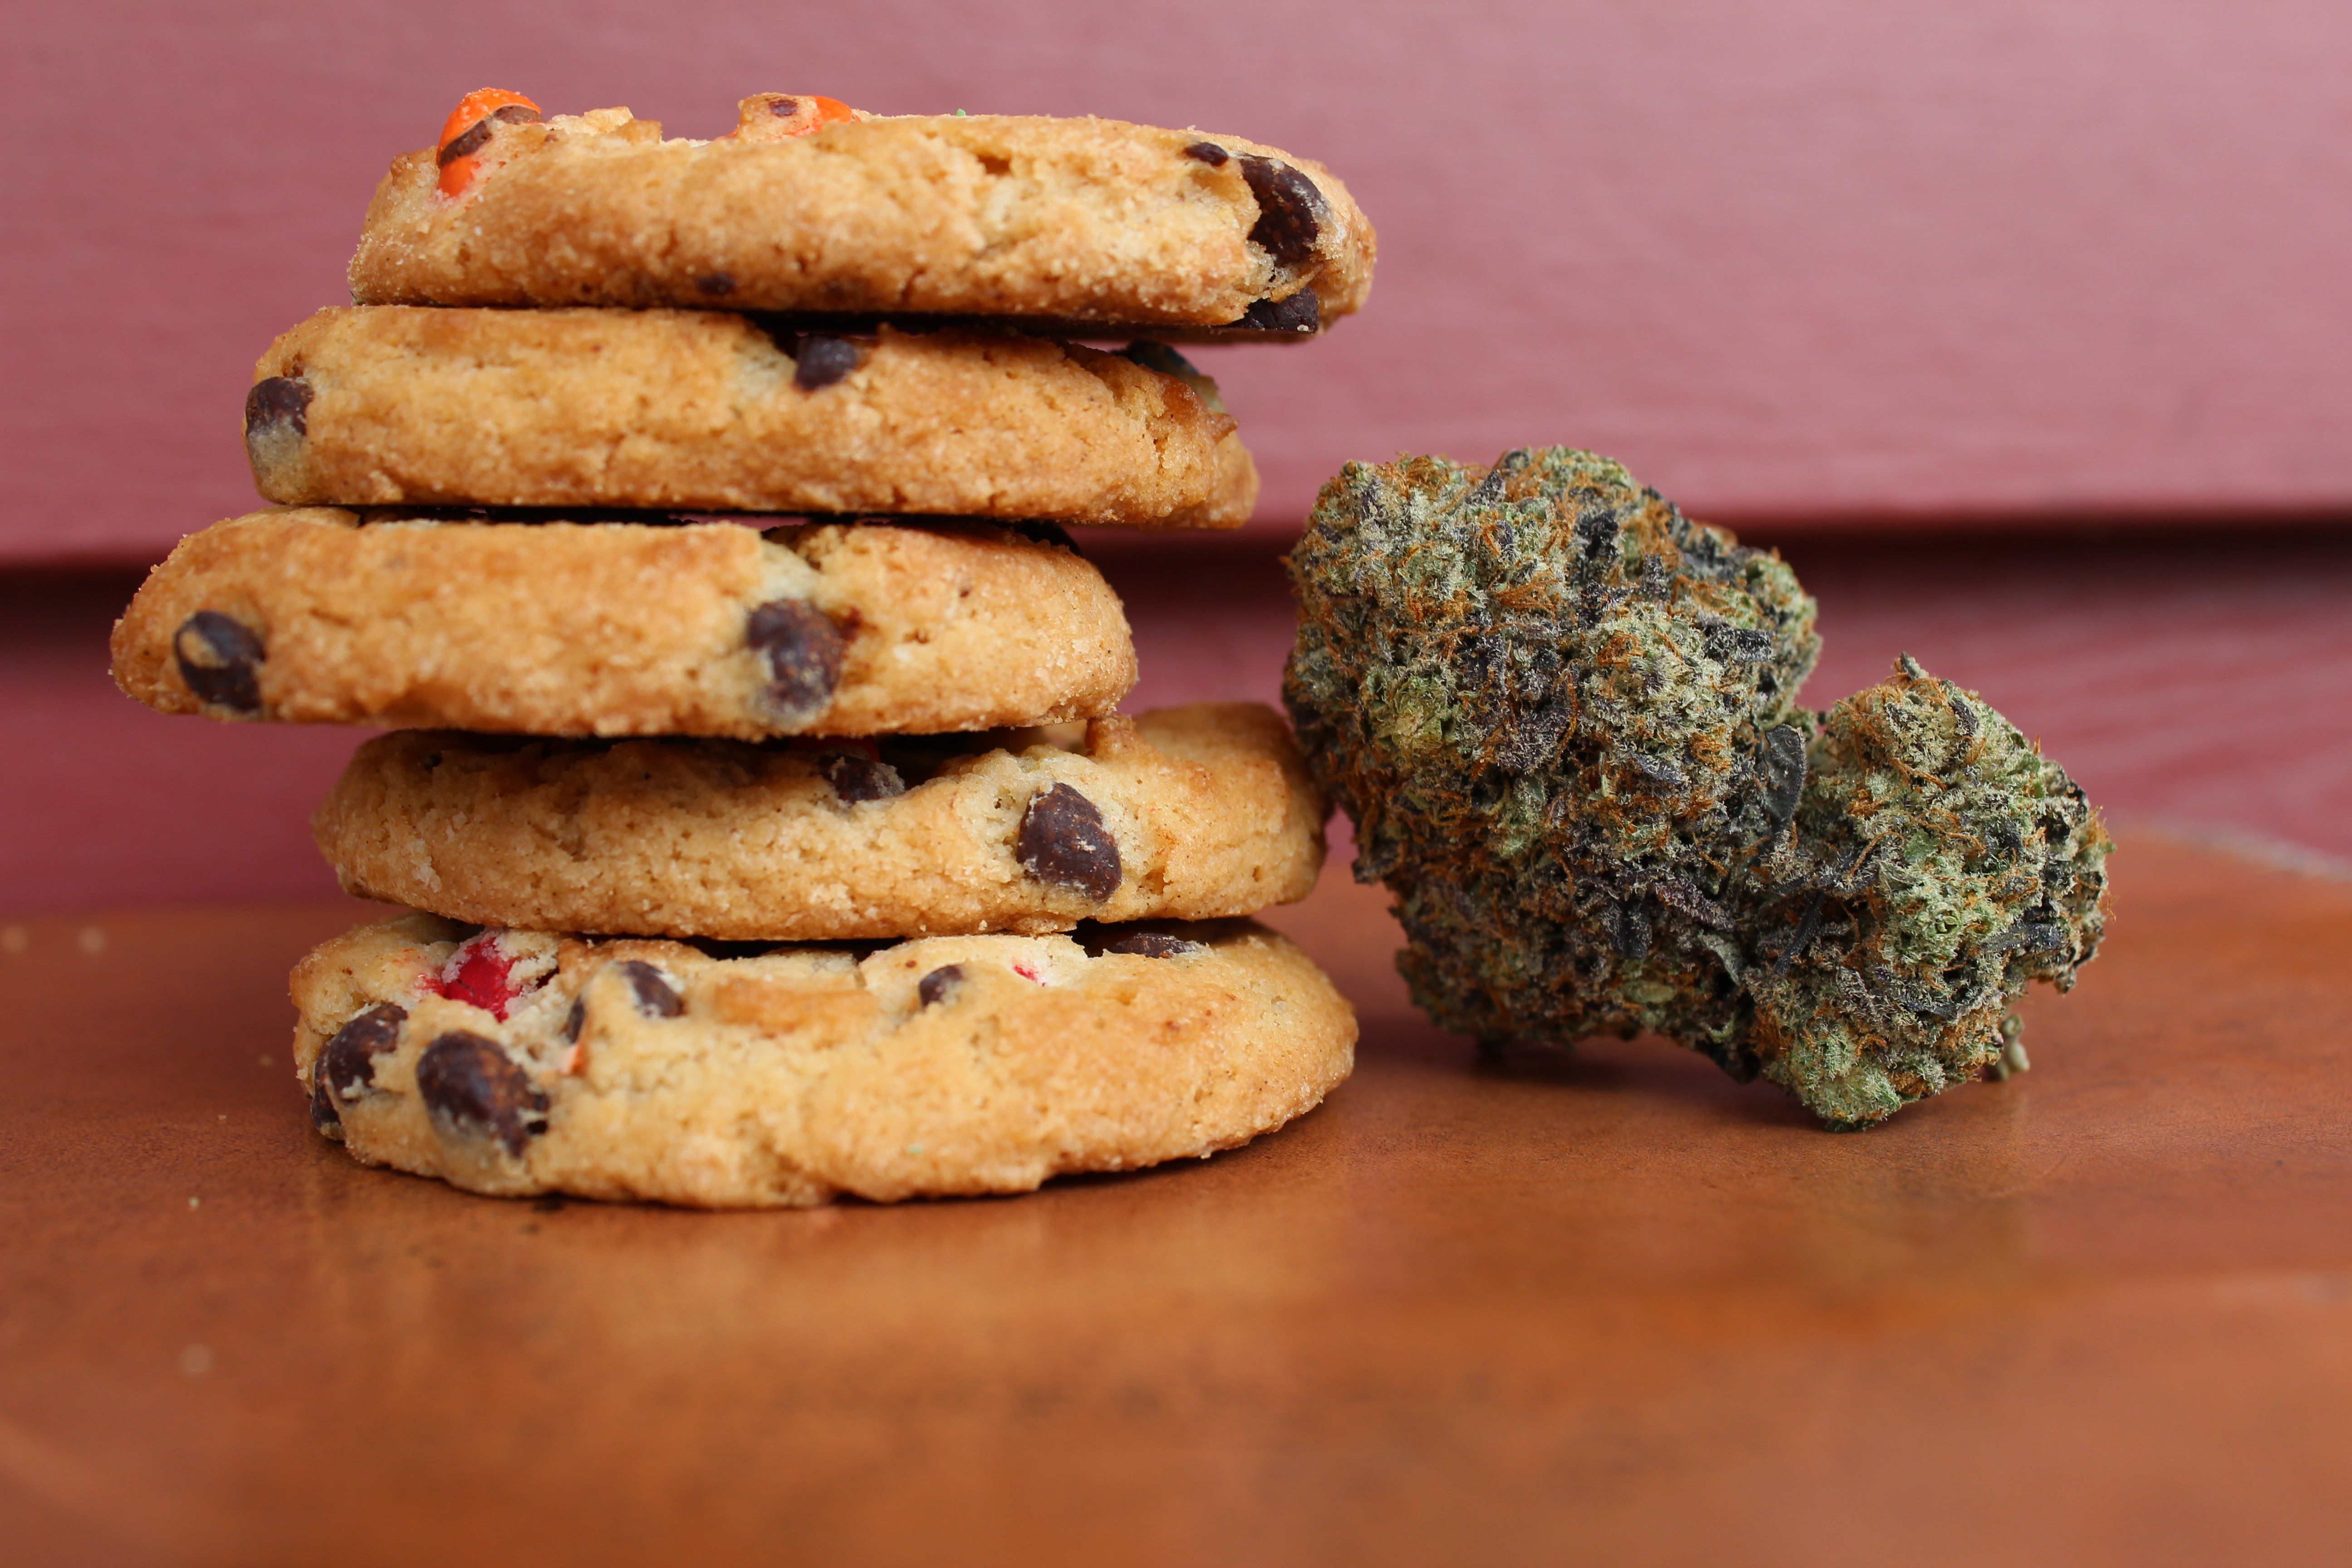 5 cookies stacked on top of each other next to a cannabis flower.